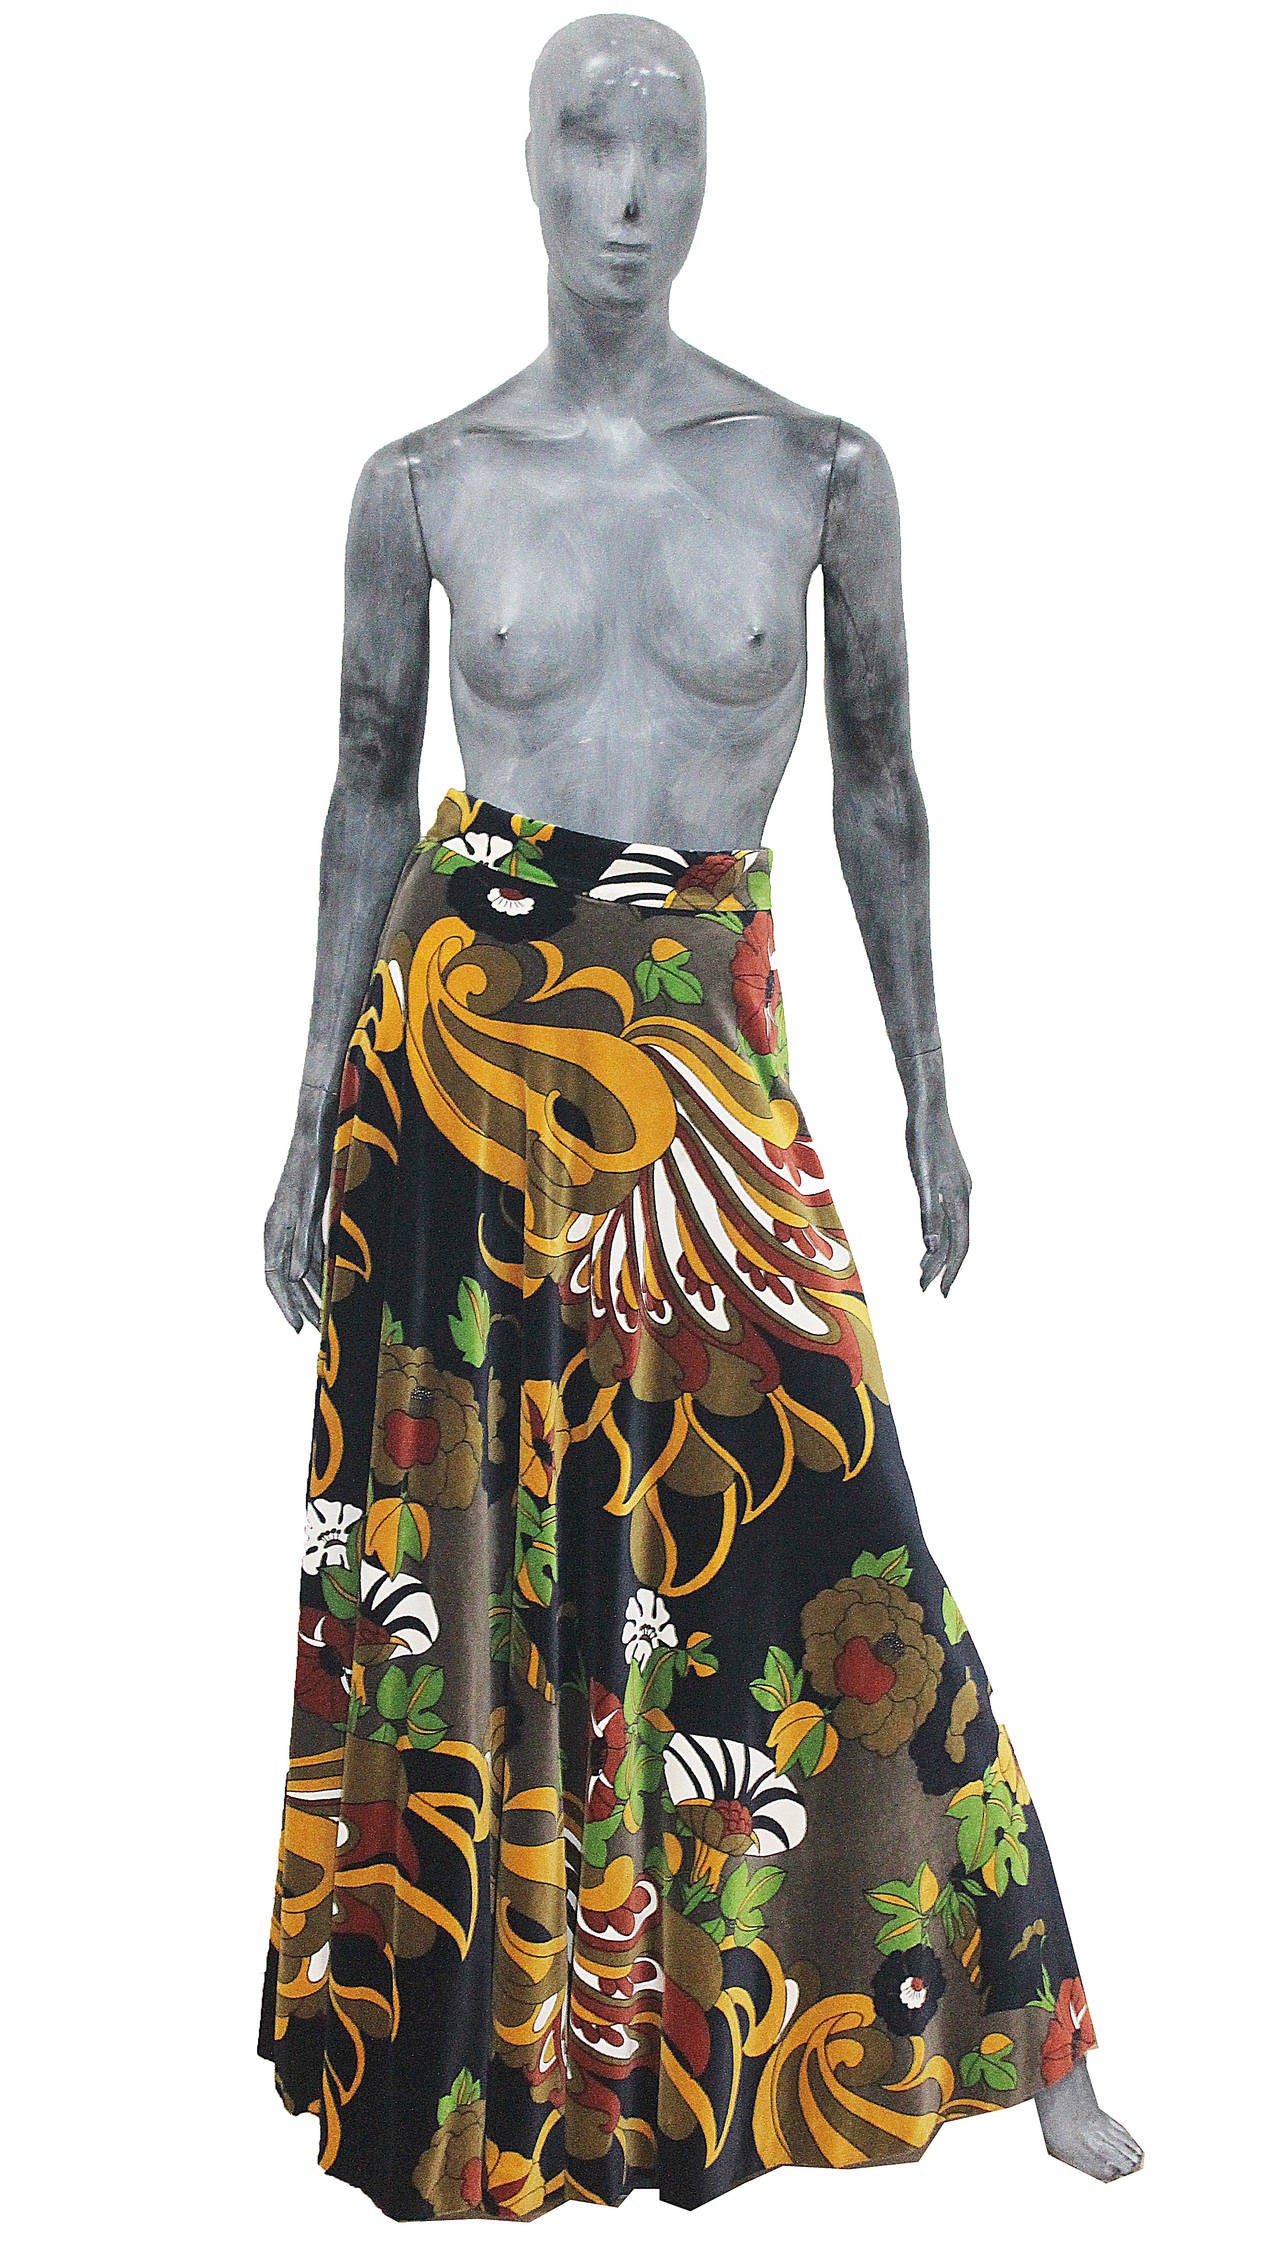 A brilliant skirt from Gina Fratini, the skirt is in velvet with a classic 1960s psychedelic print in a ray of brown, deep blue, mustard and green. 

Gina Fratini was a favourite amongst the Royal family especially Princess Diana who wore her